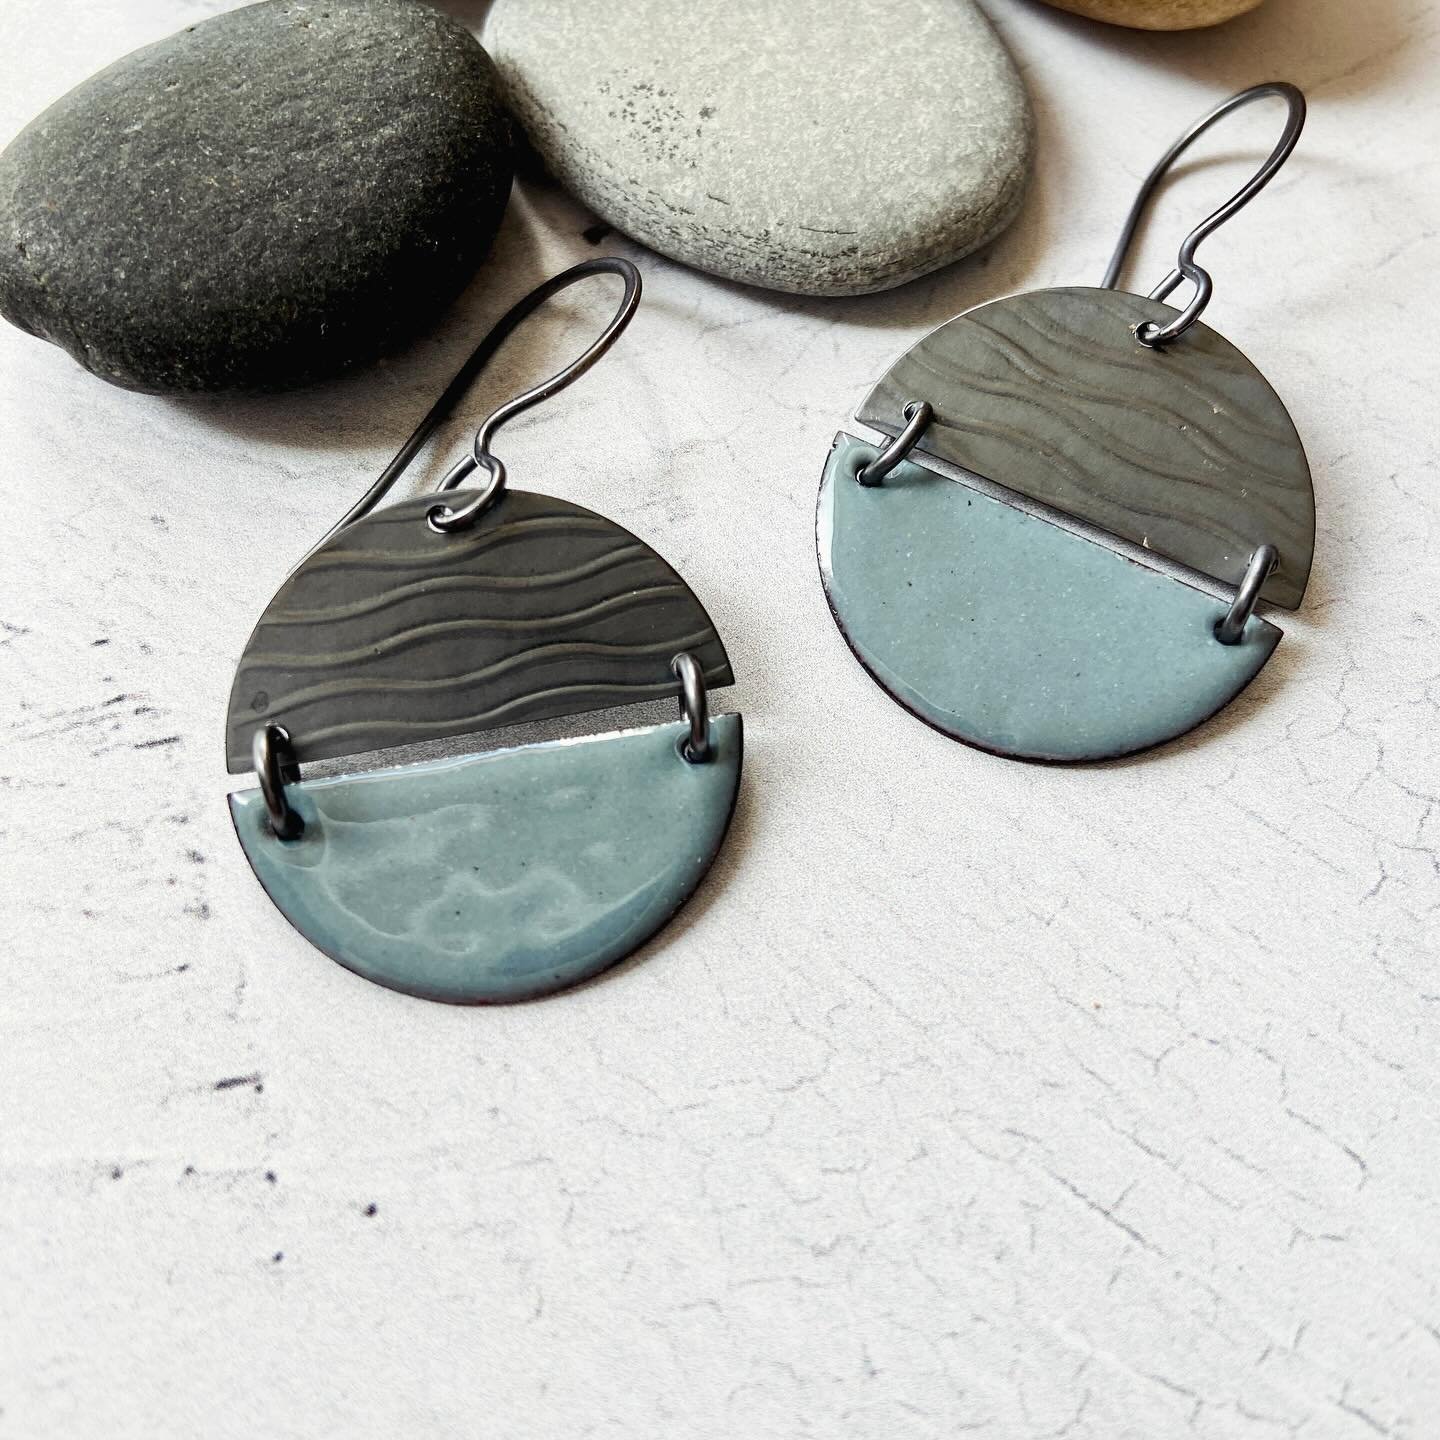 Inspired by the sea ~ textured silver with enamel in shades of blue. Now available. 

#oceaninspired #waves #enameljewelry #artisanjewelry #whidbeyislandartist #whidbeyartmarket #mybrownwren